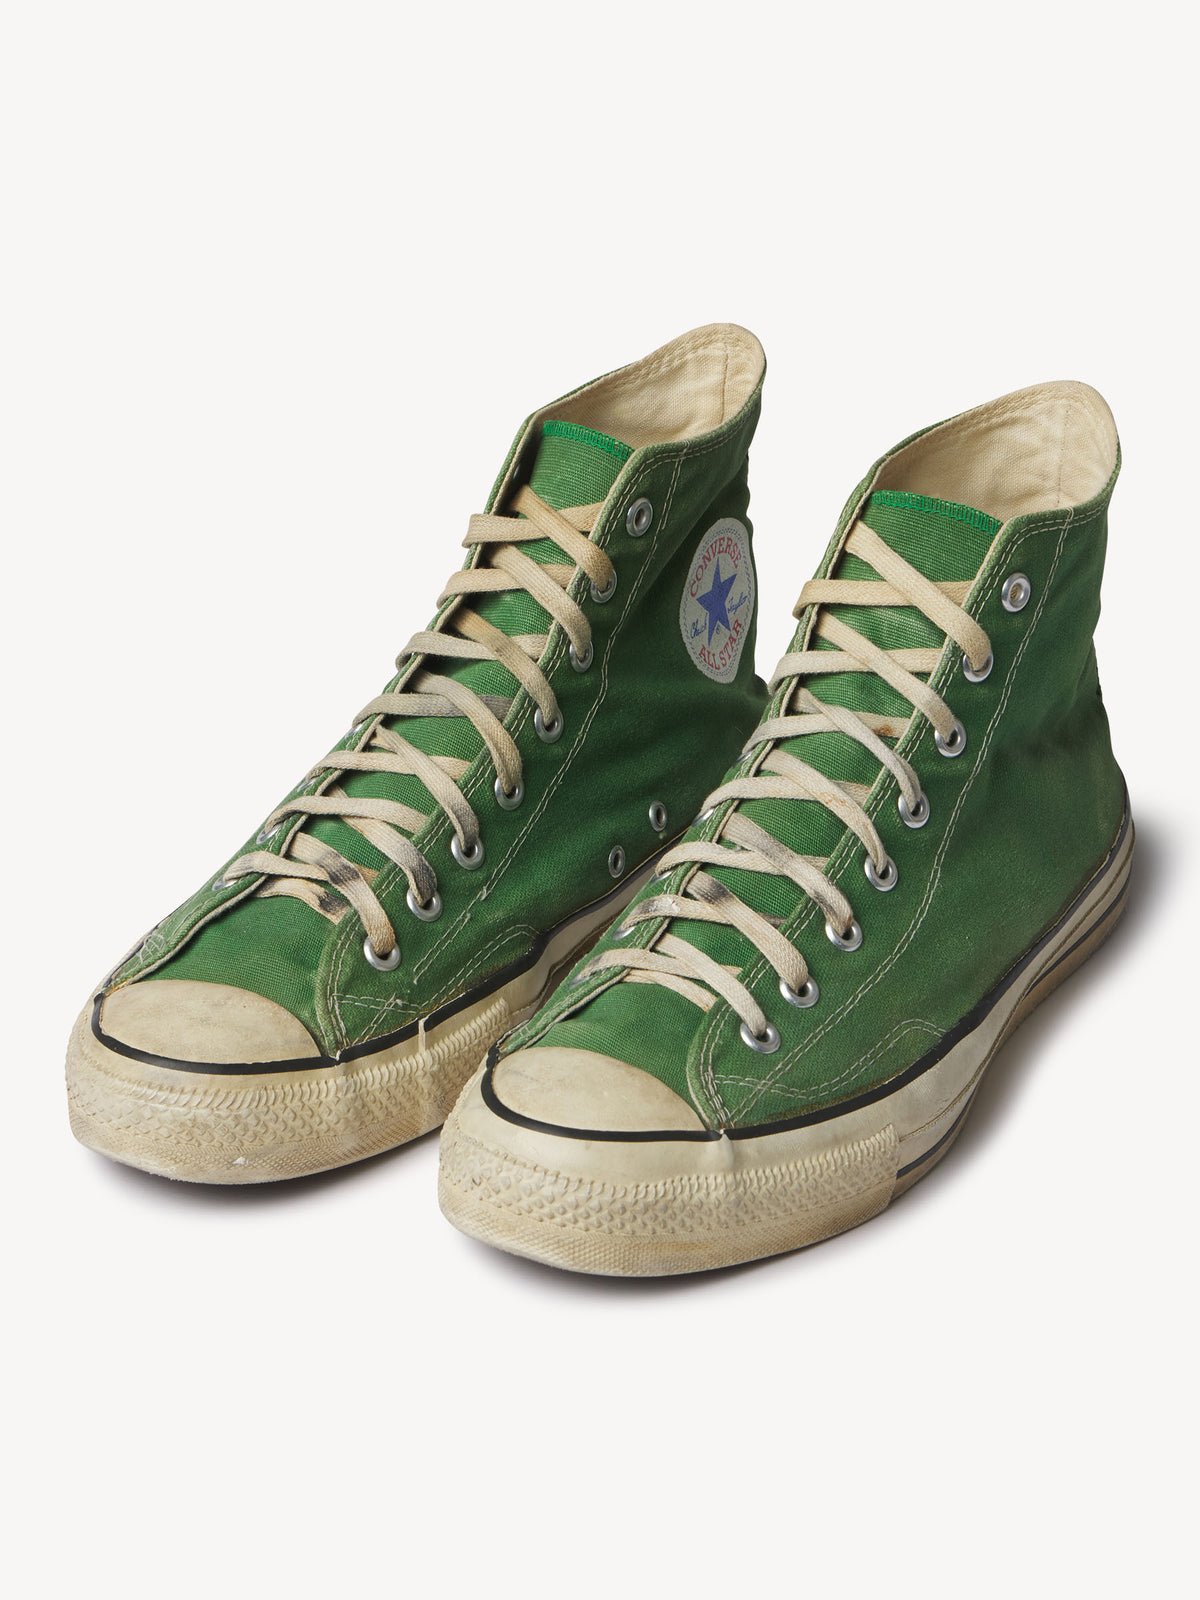 Made in USA Converse Chuck Taylor High Top - 0260 - Product Flat